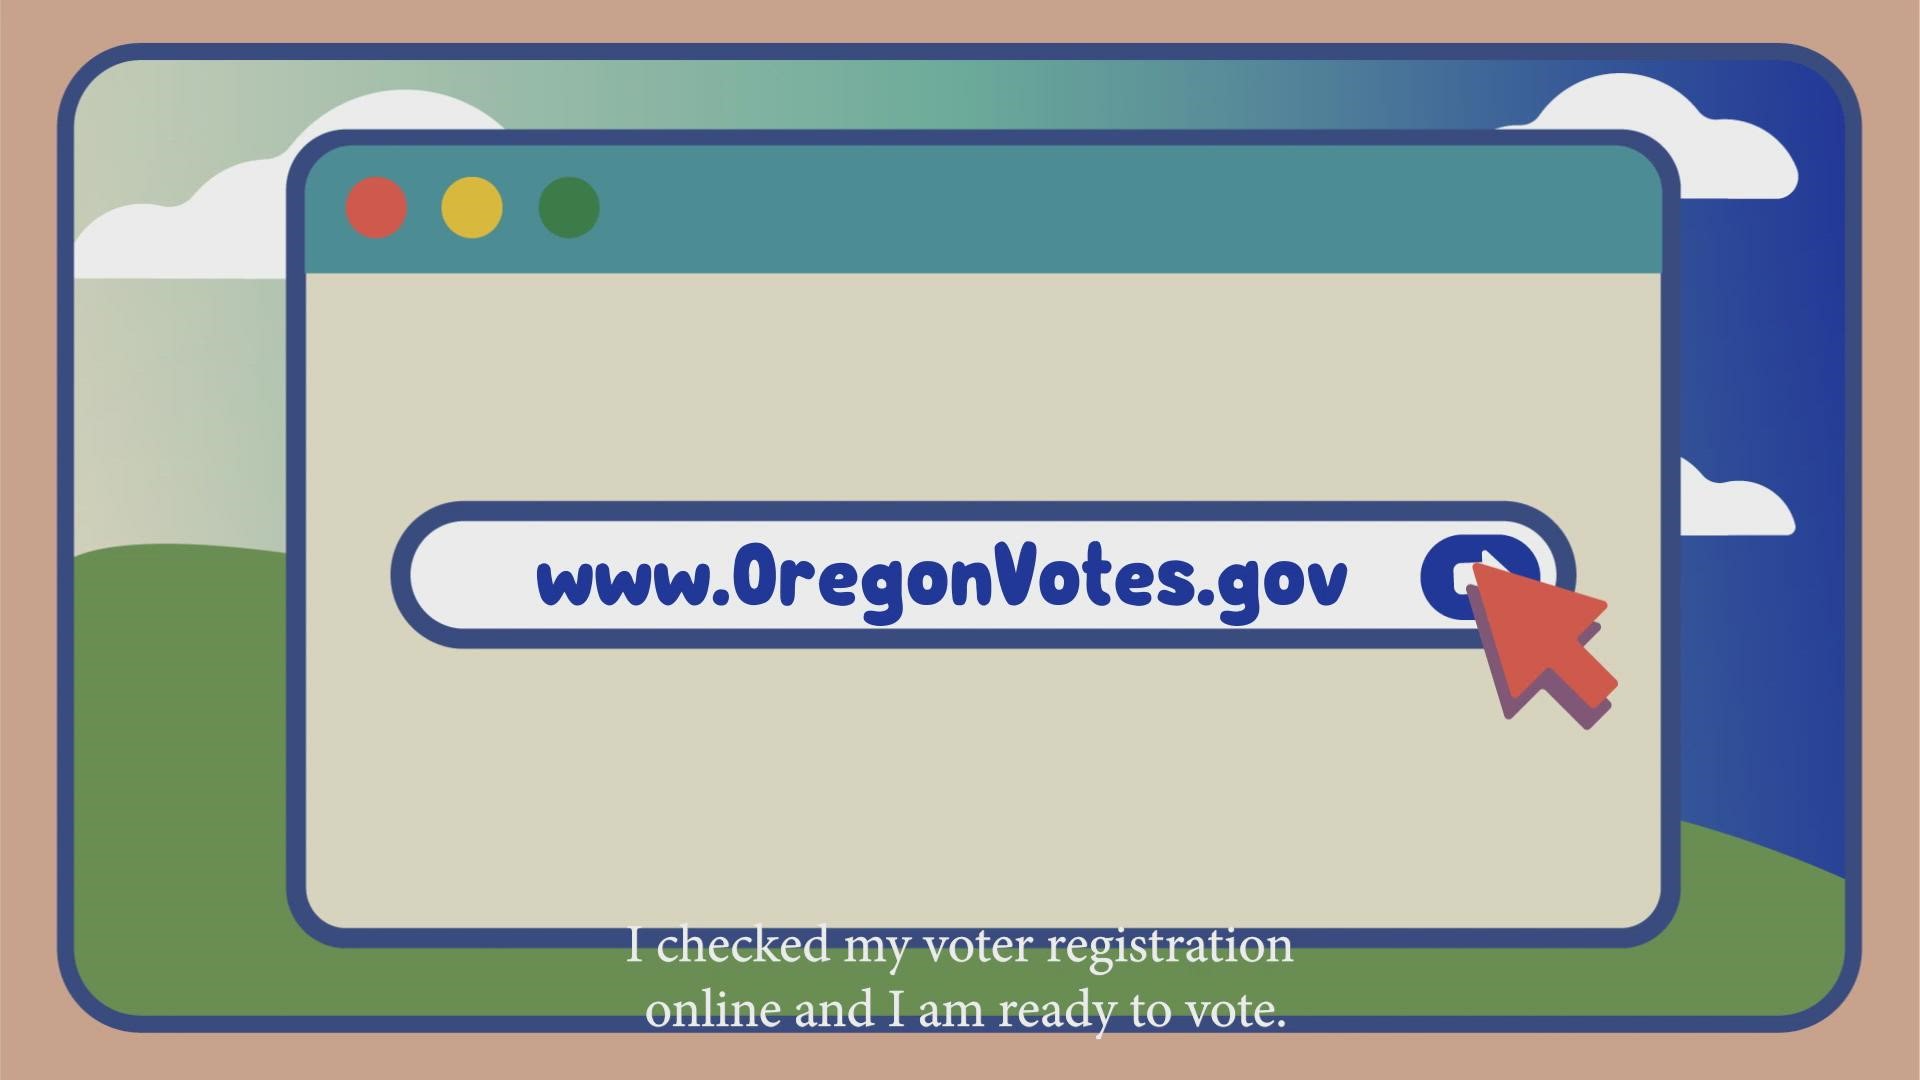 The Oregon Secretary of State' s office released a series of PSAs to combat election misinformation.